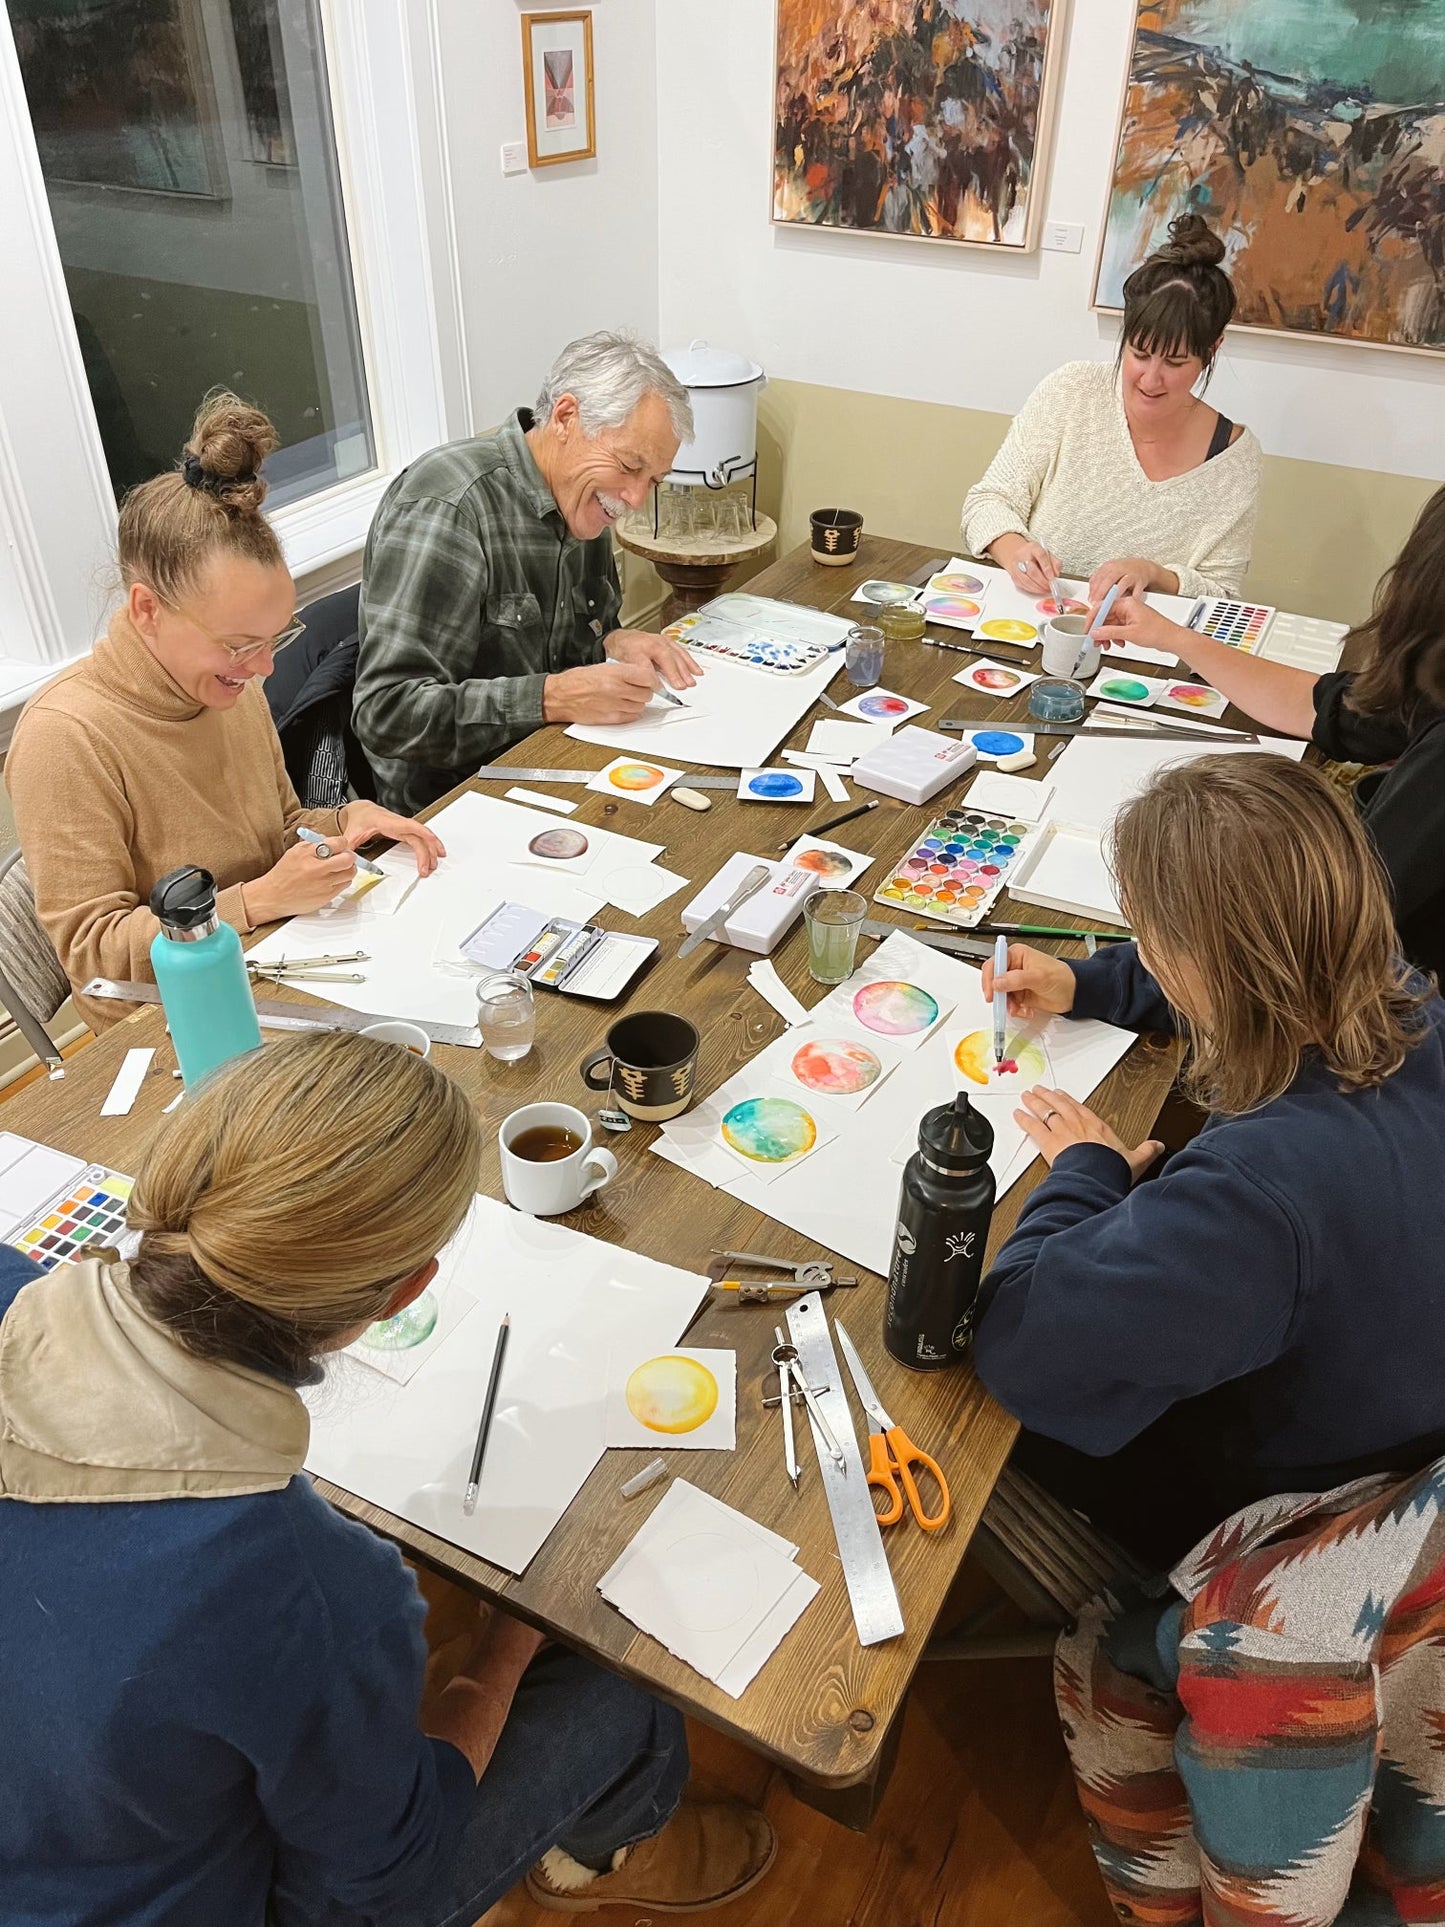 02/24 - Watercolor Moons with Amelia Morton 5pm - 7pm